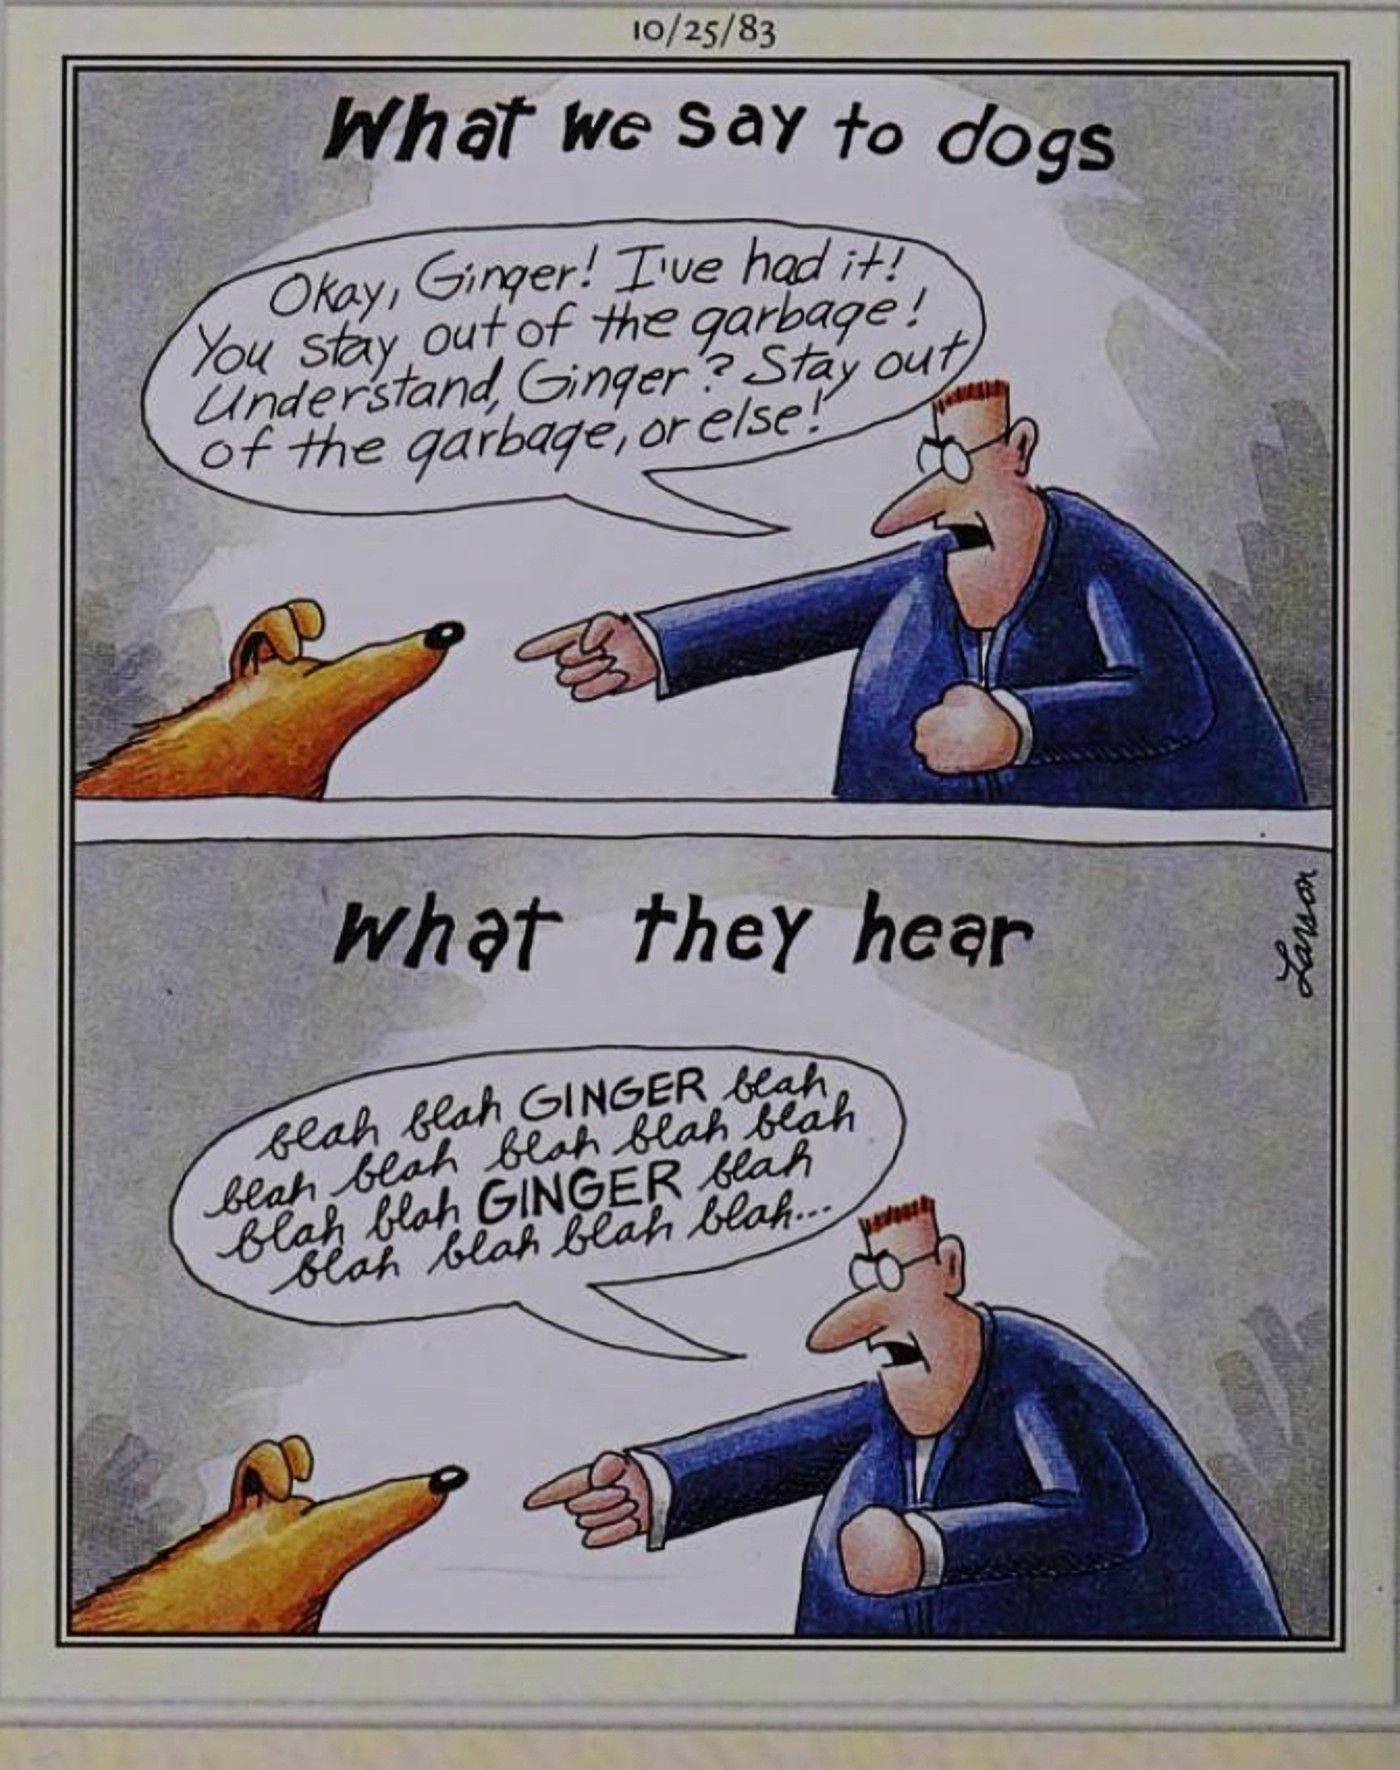 Far Side, what dogs hear when their owners speak